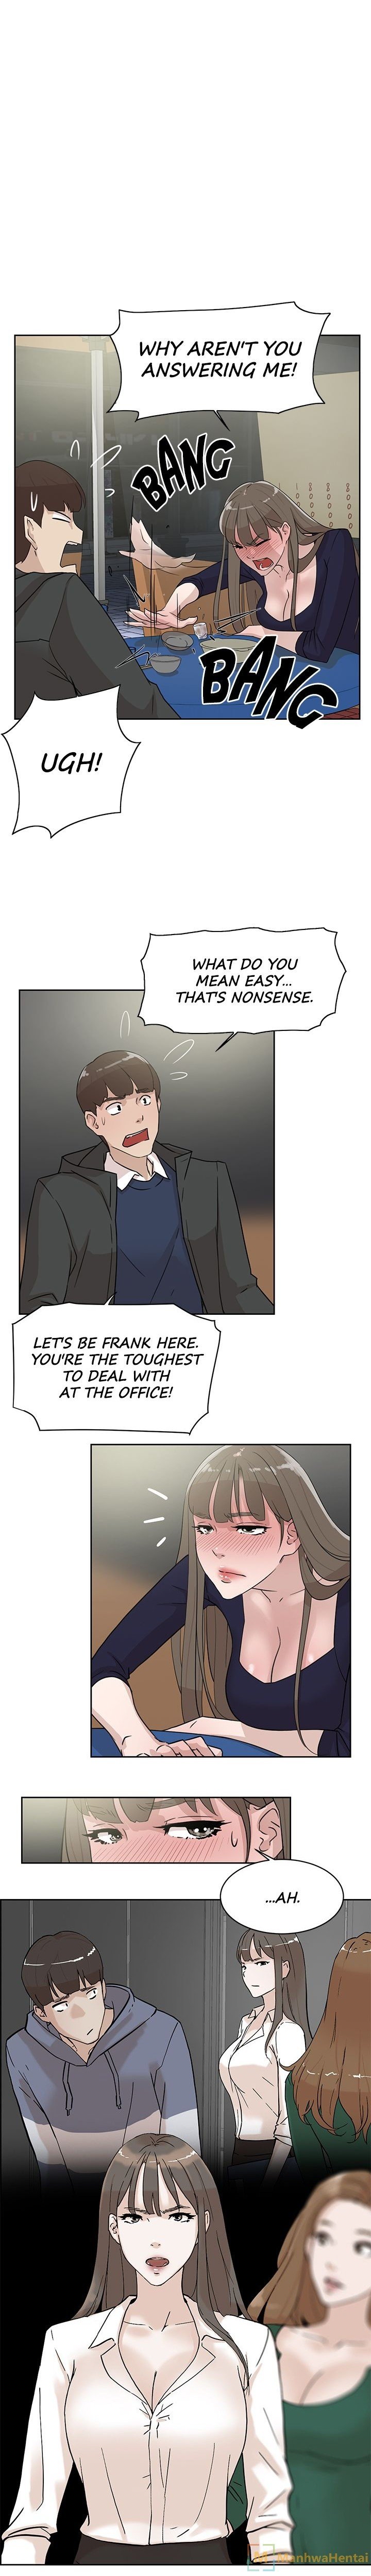 office-affairs-chap-31-1